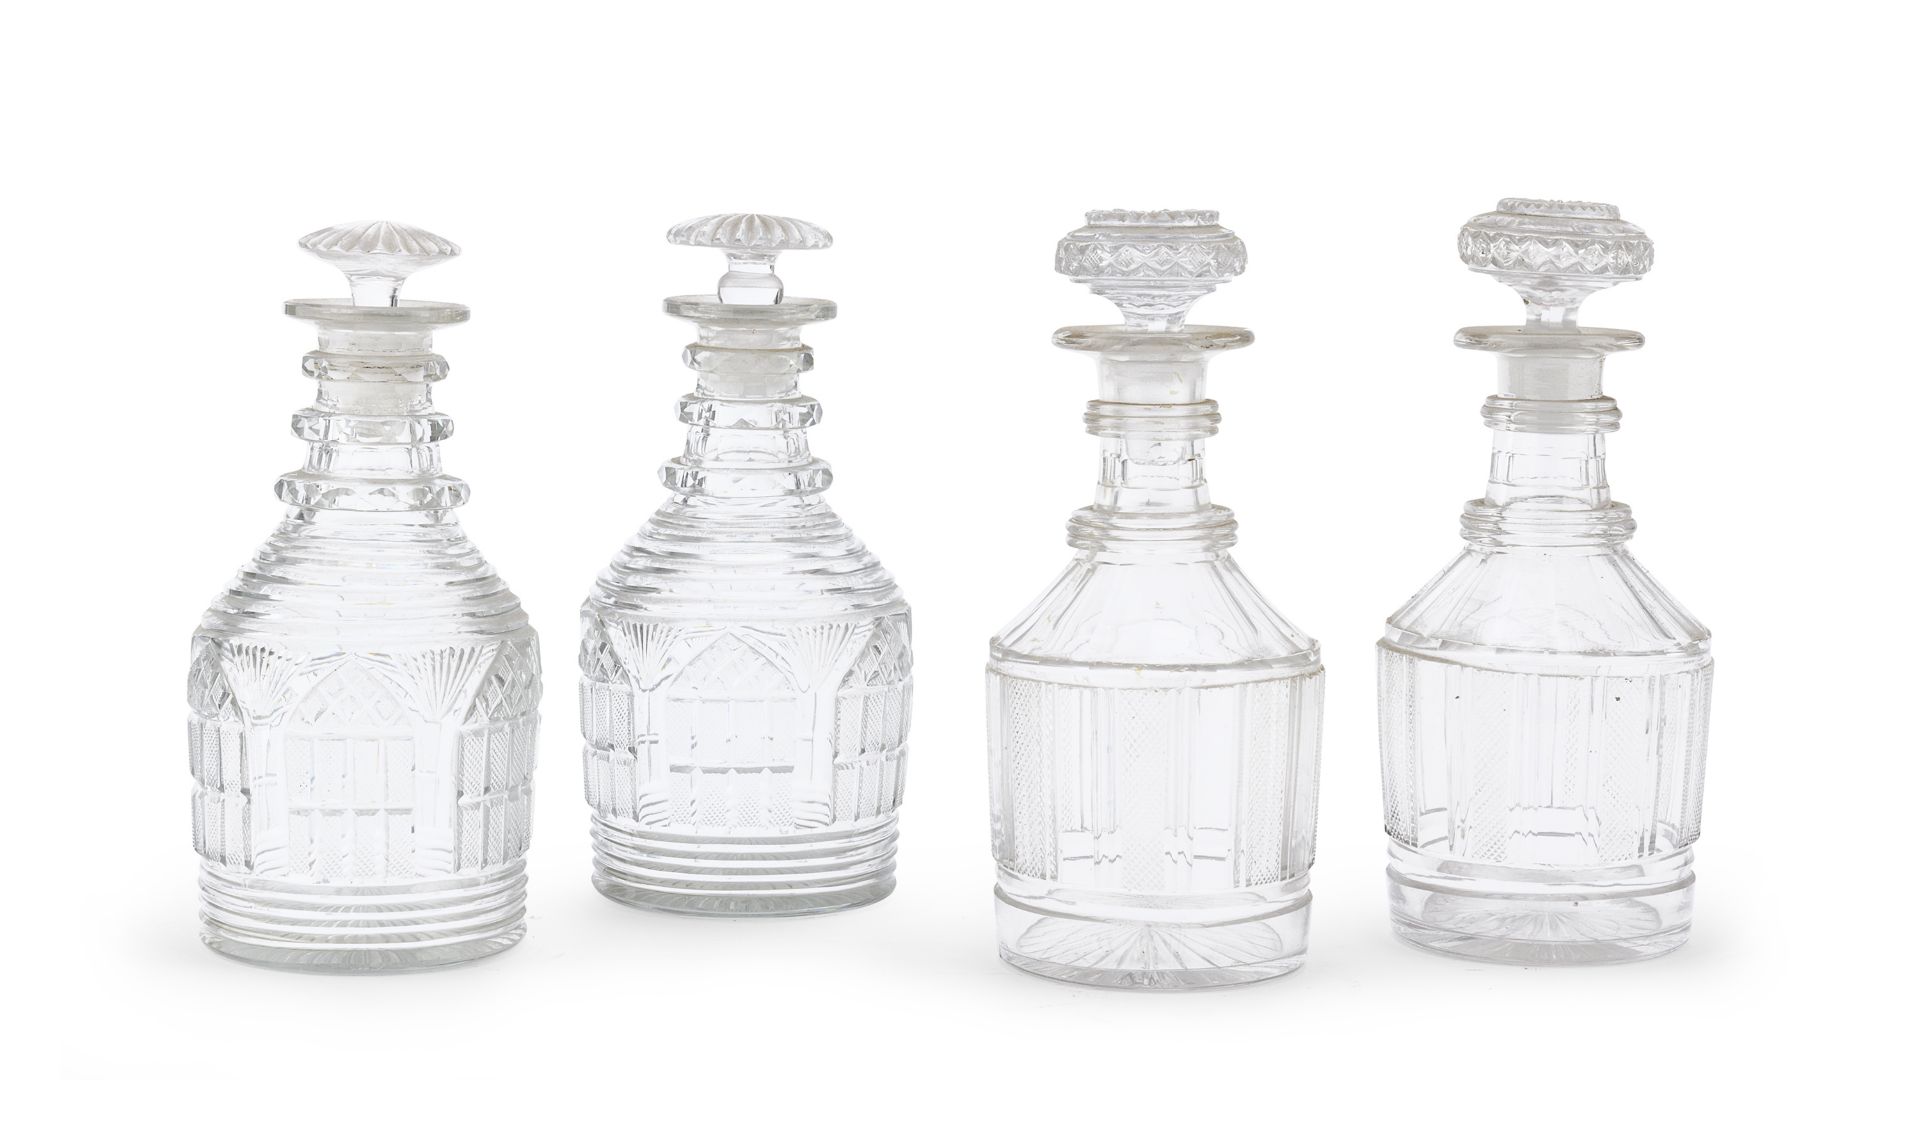 FOUR GLASS BOTTLES END OF 19TH CENTURY